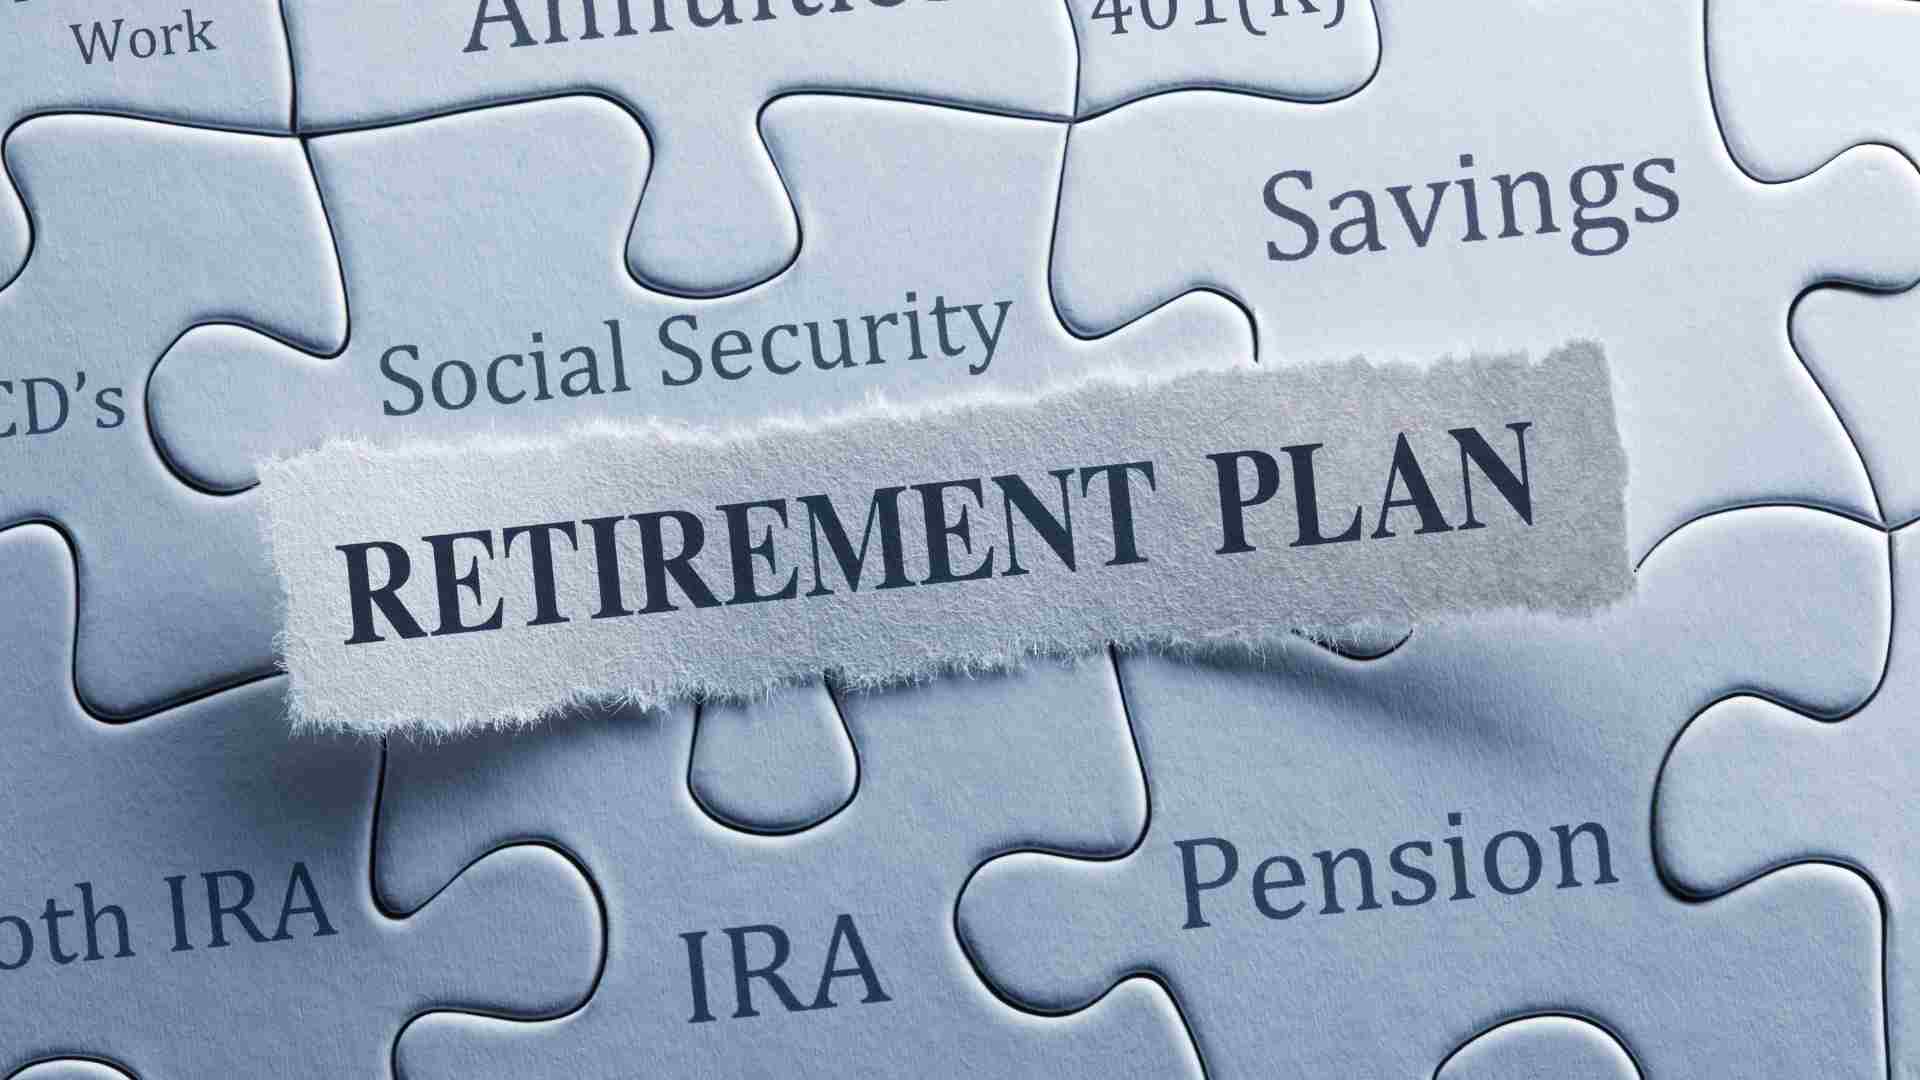 Workers should start planning their retirment soon, Social Security should not be the main source of income